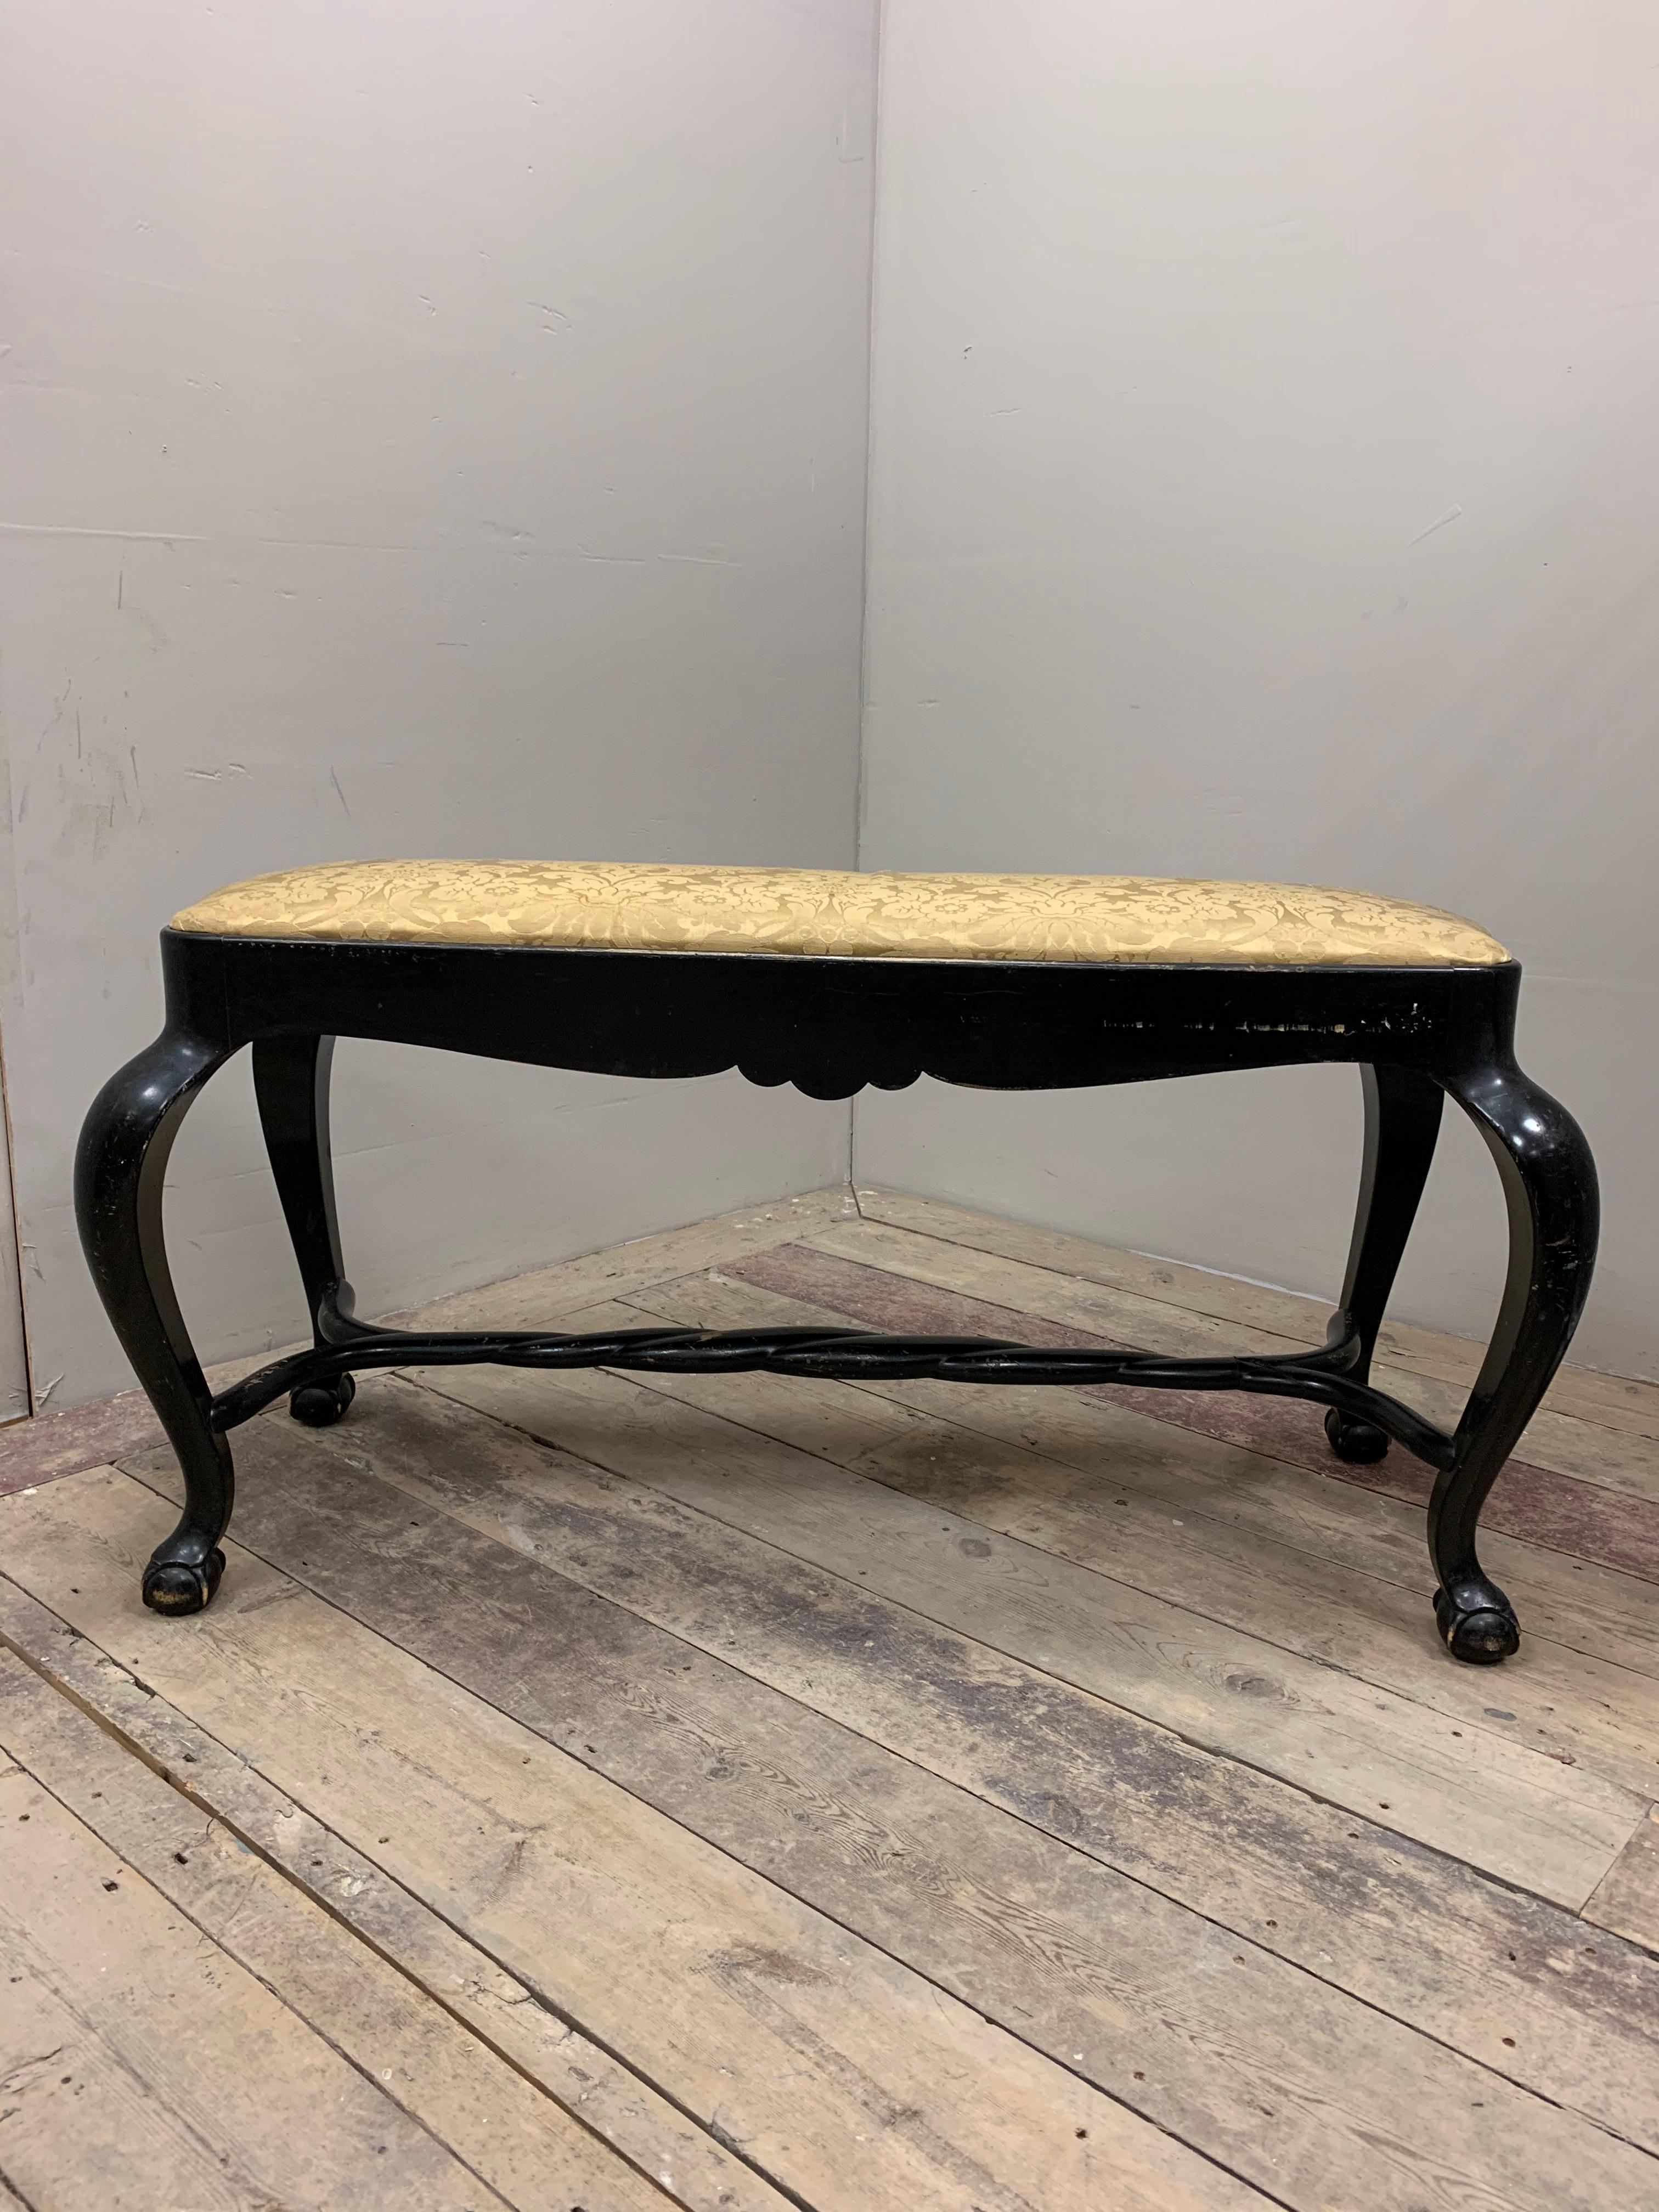 Wonderful and stylish 1920s ebonised stool/bench in the Baroque style.
With a drop in seat which requires upholstering if you wish. This piece has an interesting plaited stretcher, cabriole legs and ball & claw feet.

Good for the end of a bed or